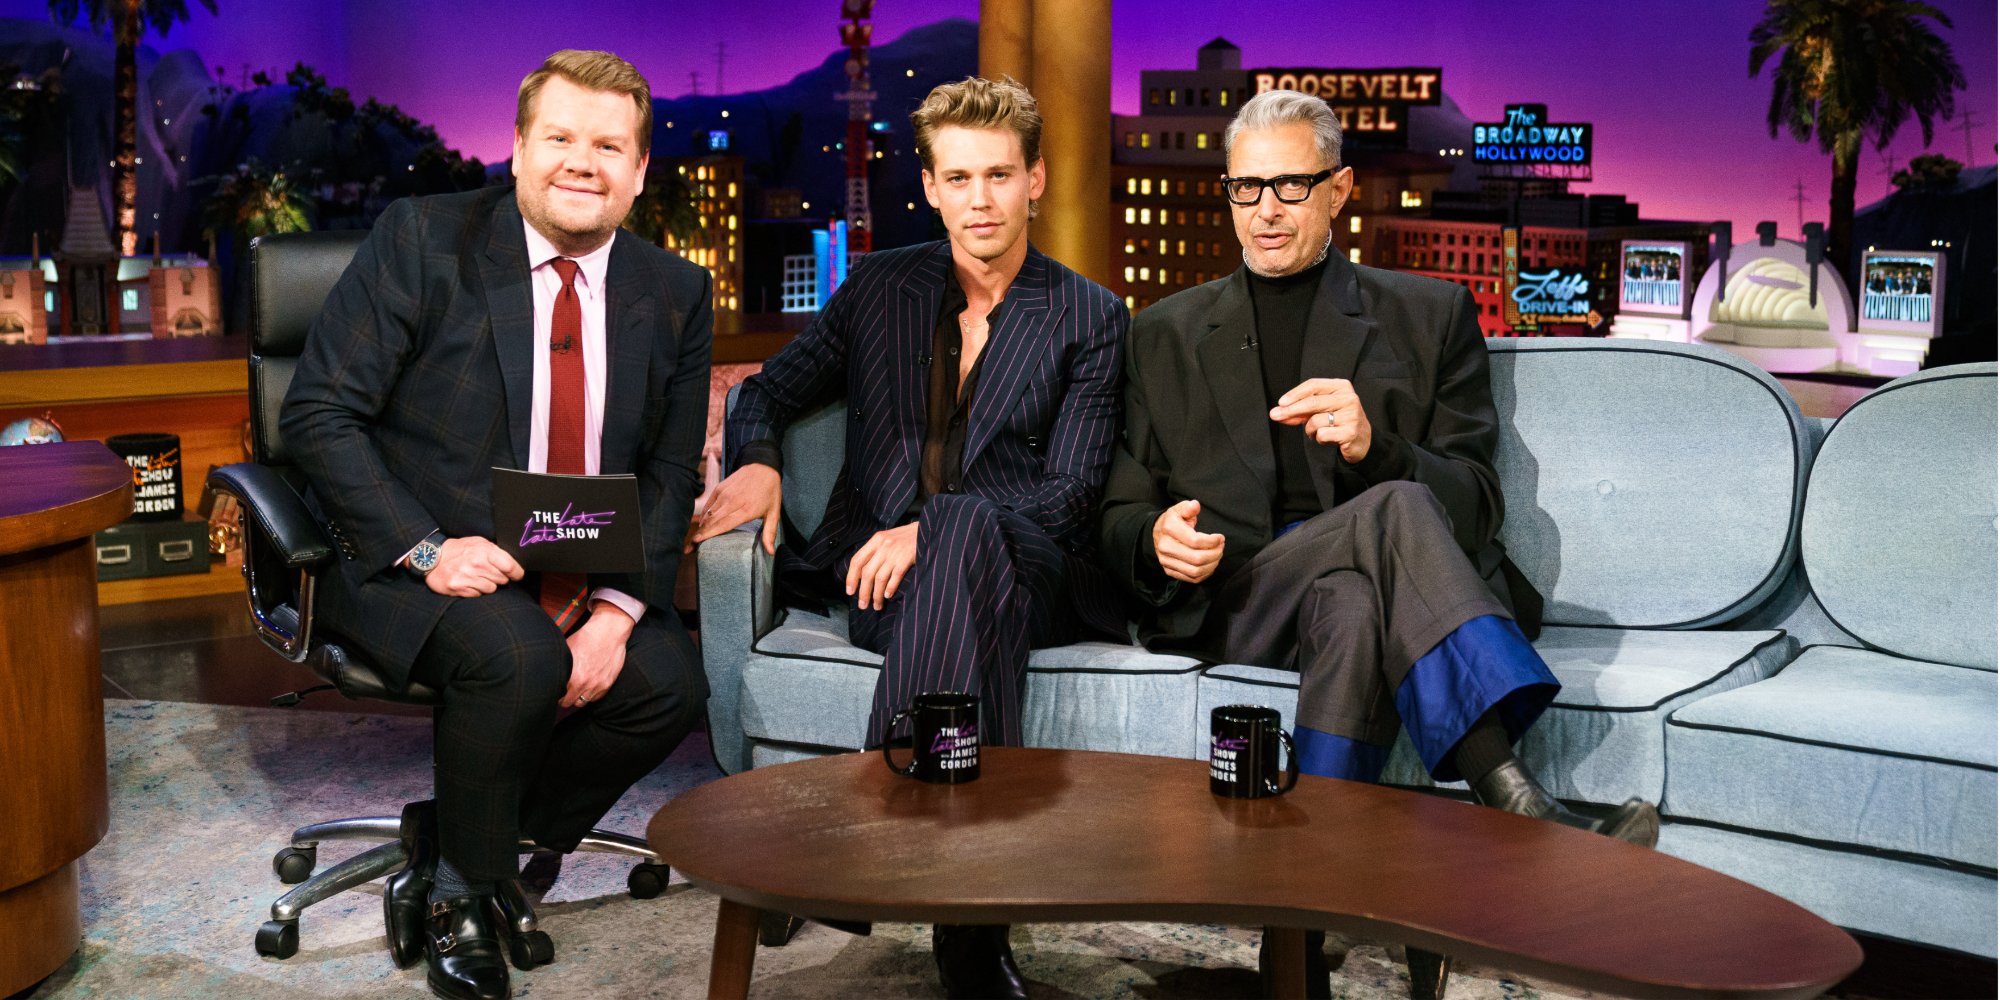 James Corden, Austin Butler and Jeff Goldblum on the set of the 'Late Late Show with James Corden.'